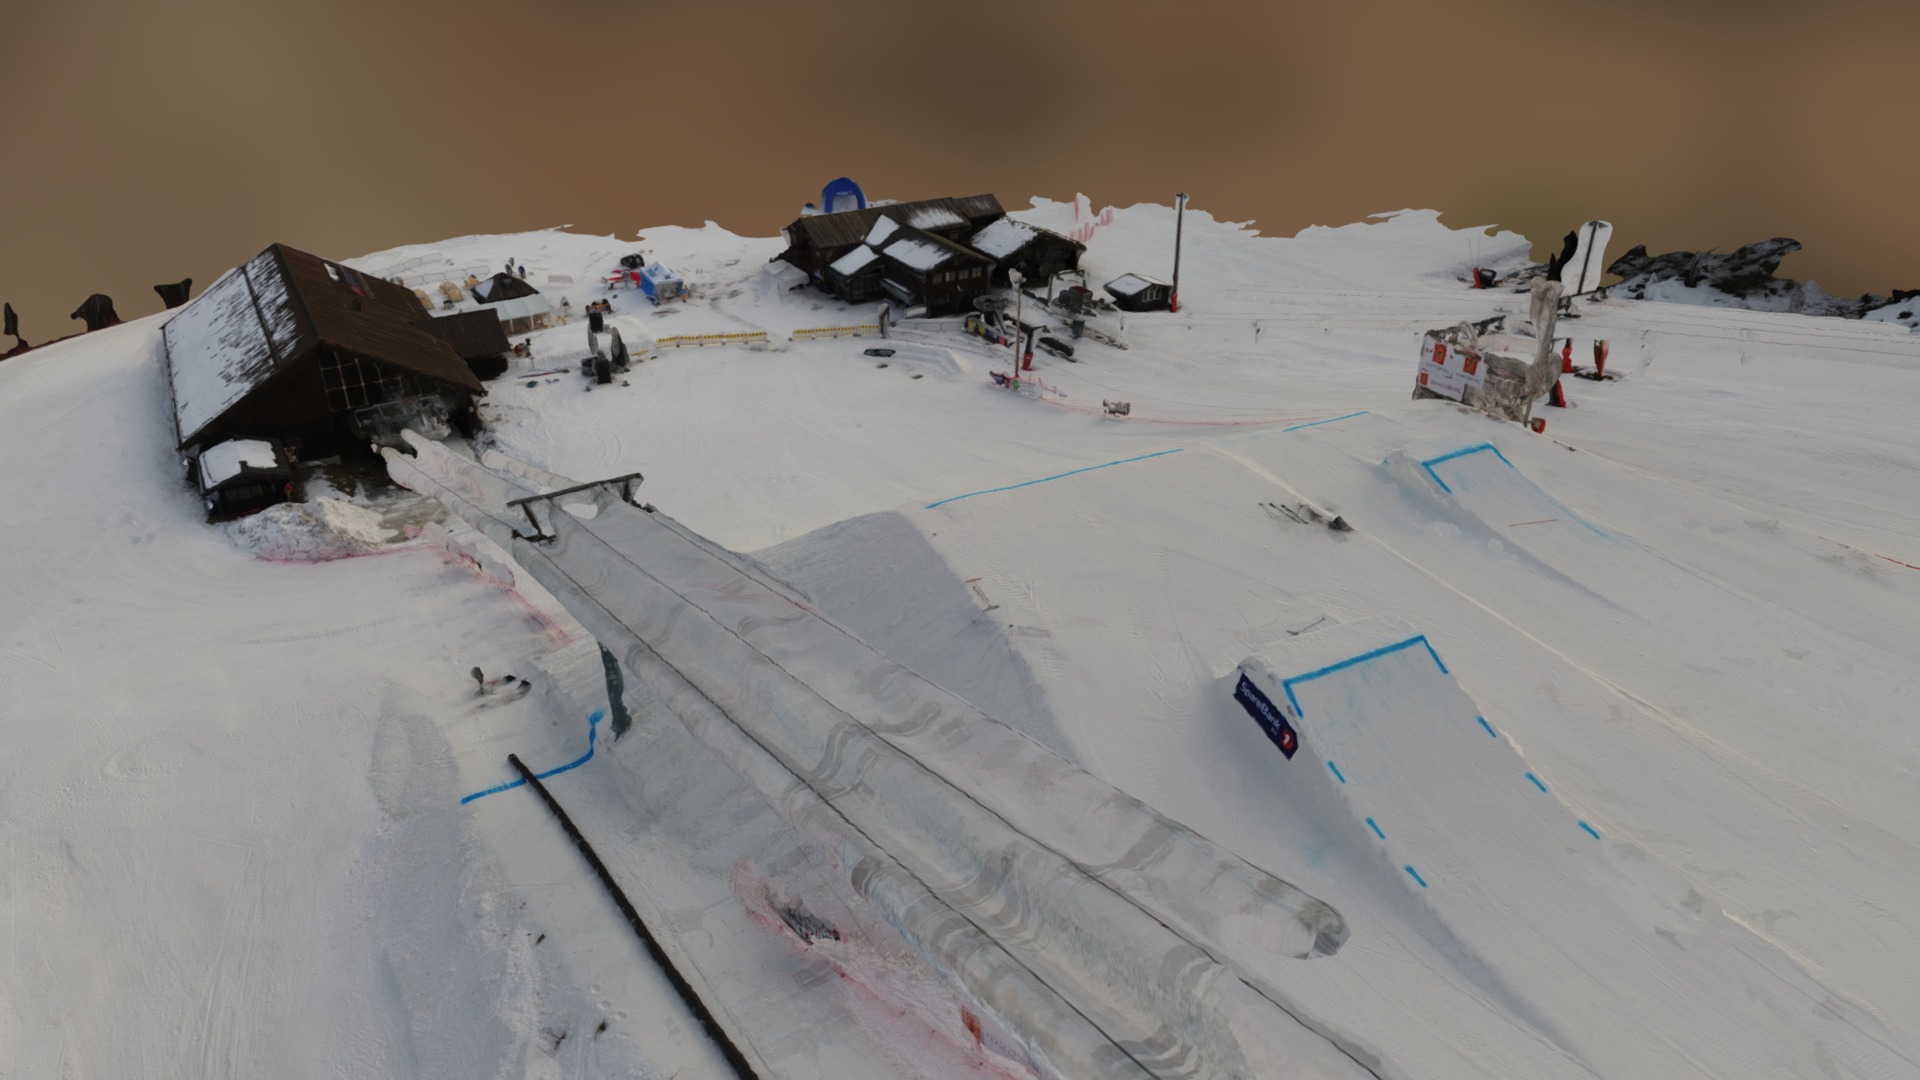 3D model Snowstock 2017 - This is a 3D model of the Snowstock 2017. The 3D model is about a ski lift on a snowy mountain.